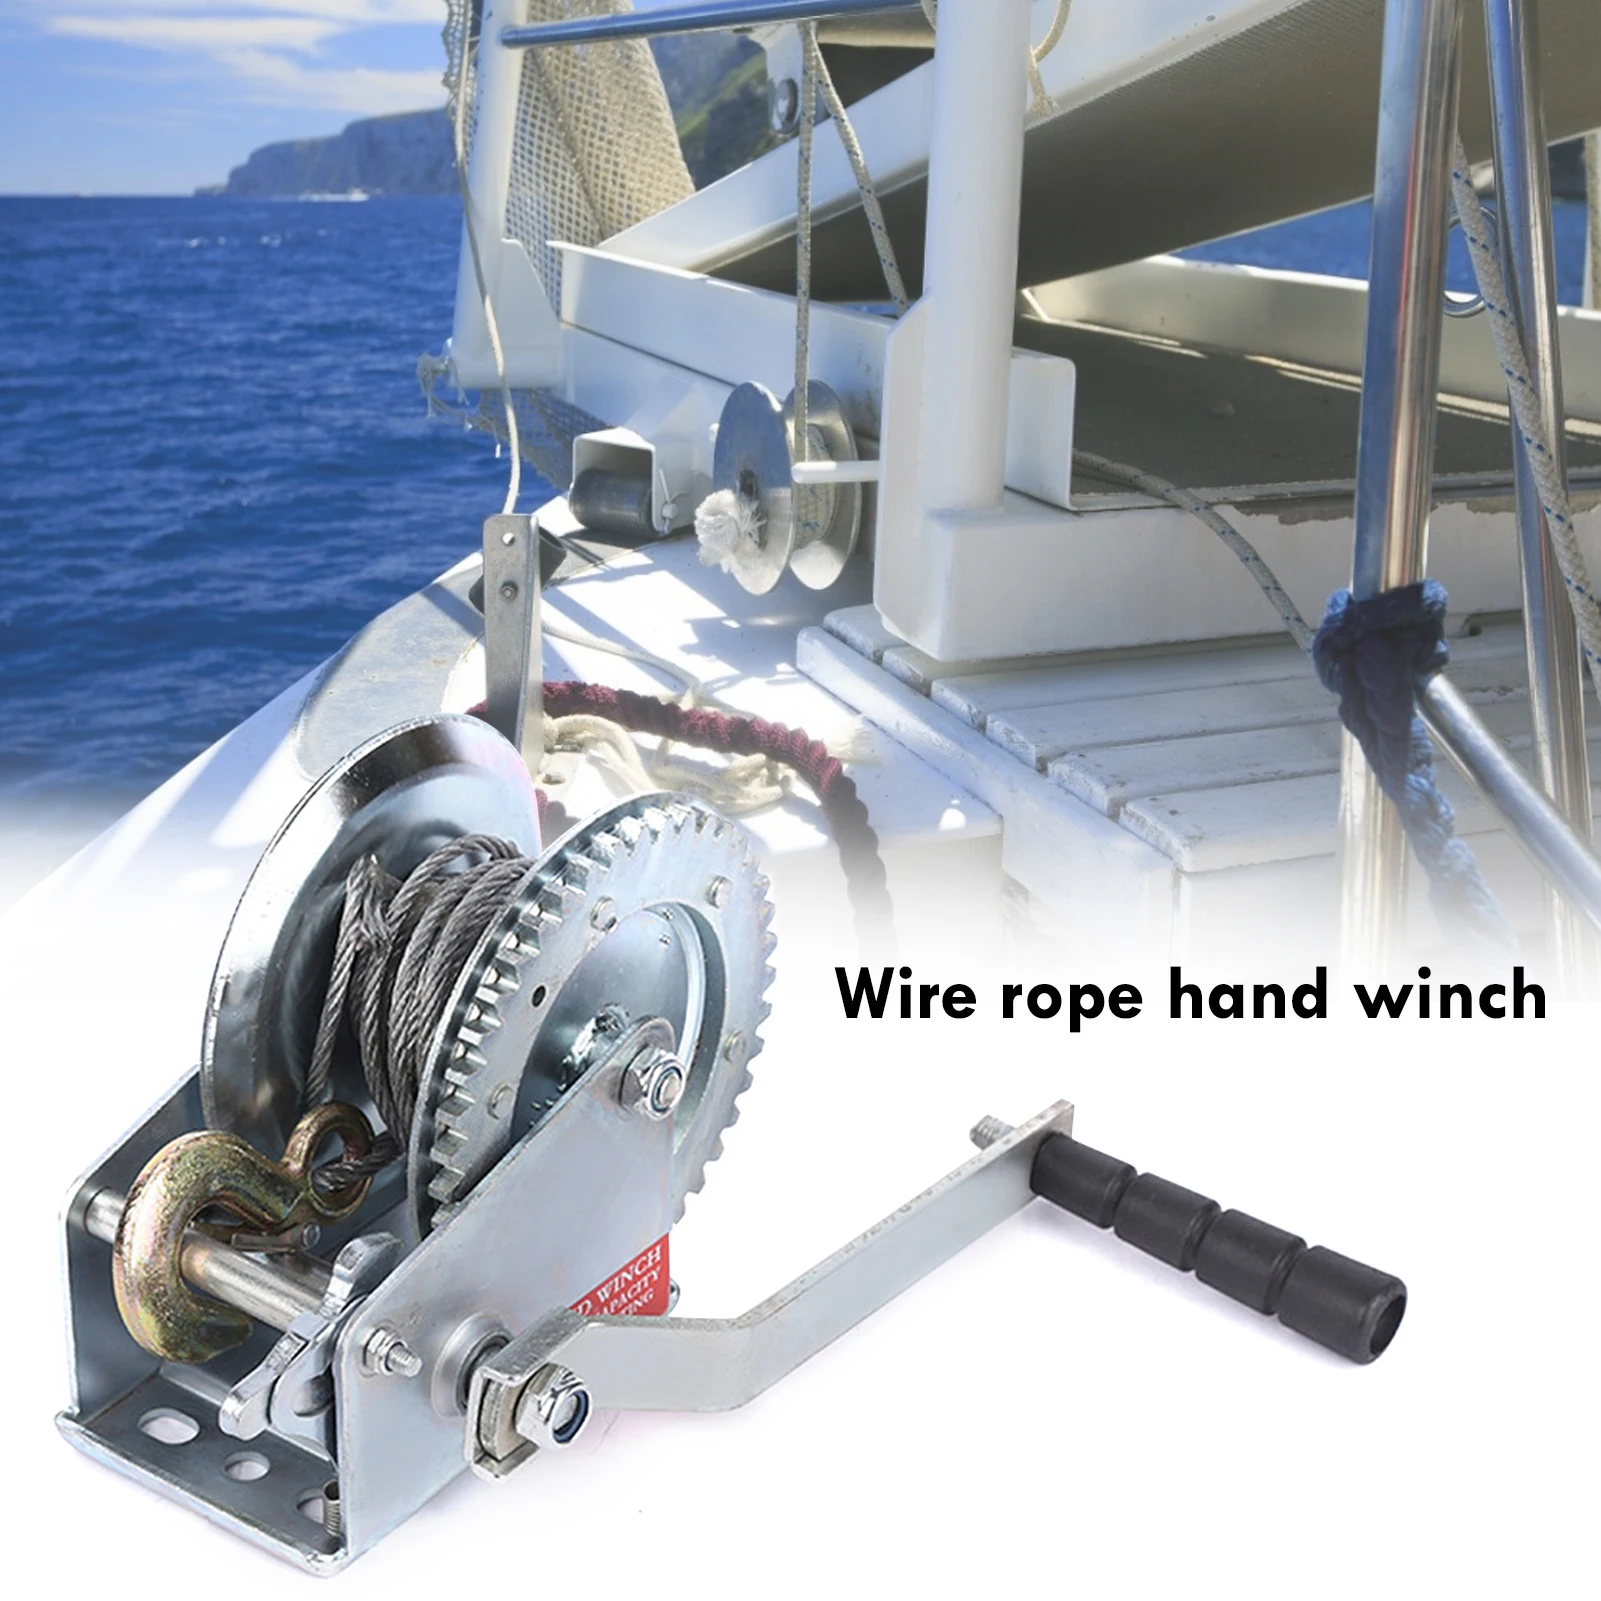 

Mini Hand Winch Durable Practical Manual Winch Tool Equipment Wire Rope High Quality Hand Winch 800LBS